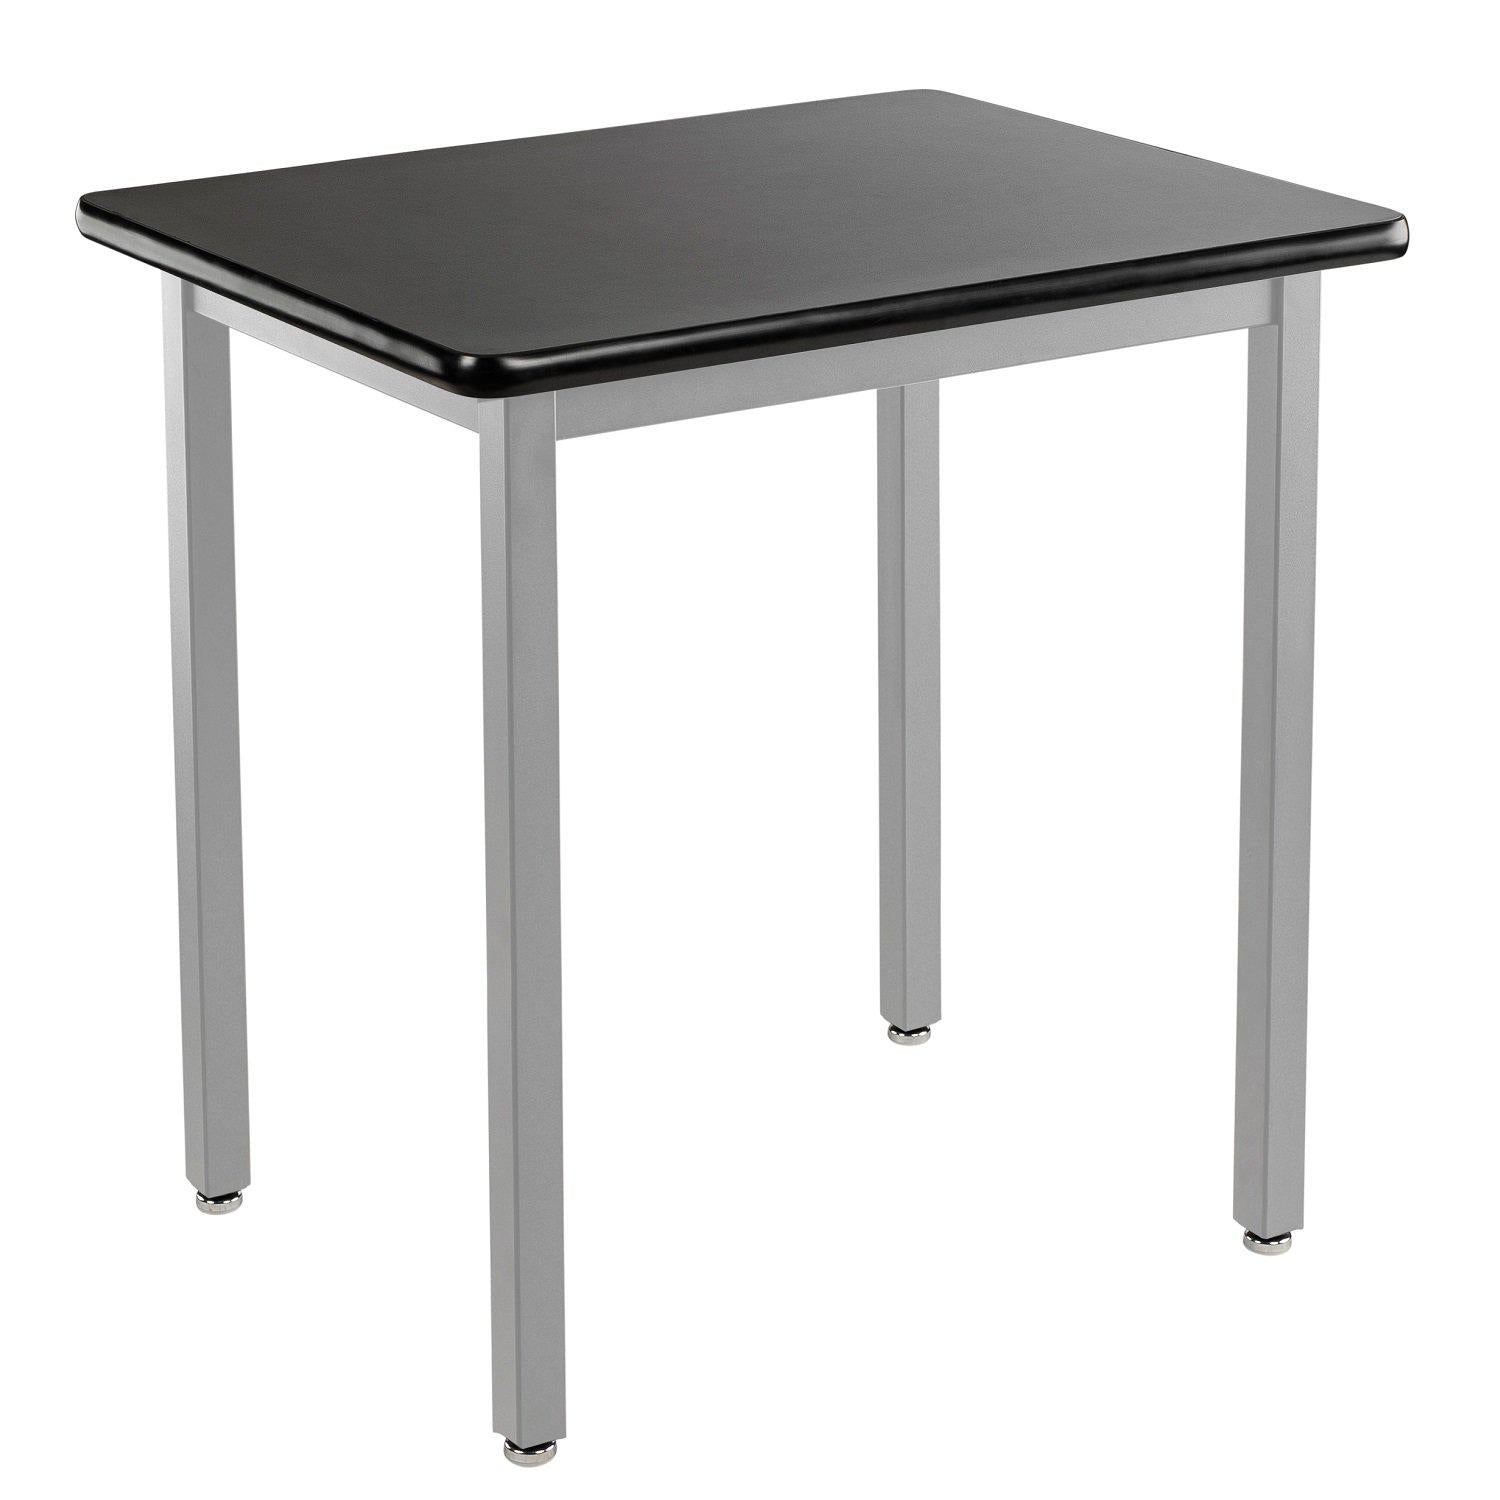 Heavy-Duty Fixed Height Utility Table, Soft Grey Frame, 24" x 36", High-Pressure Laminate Top with T-Mold Edge